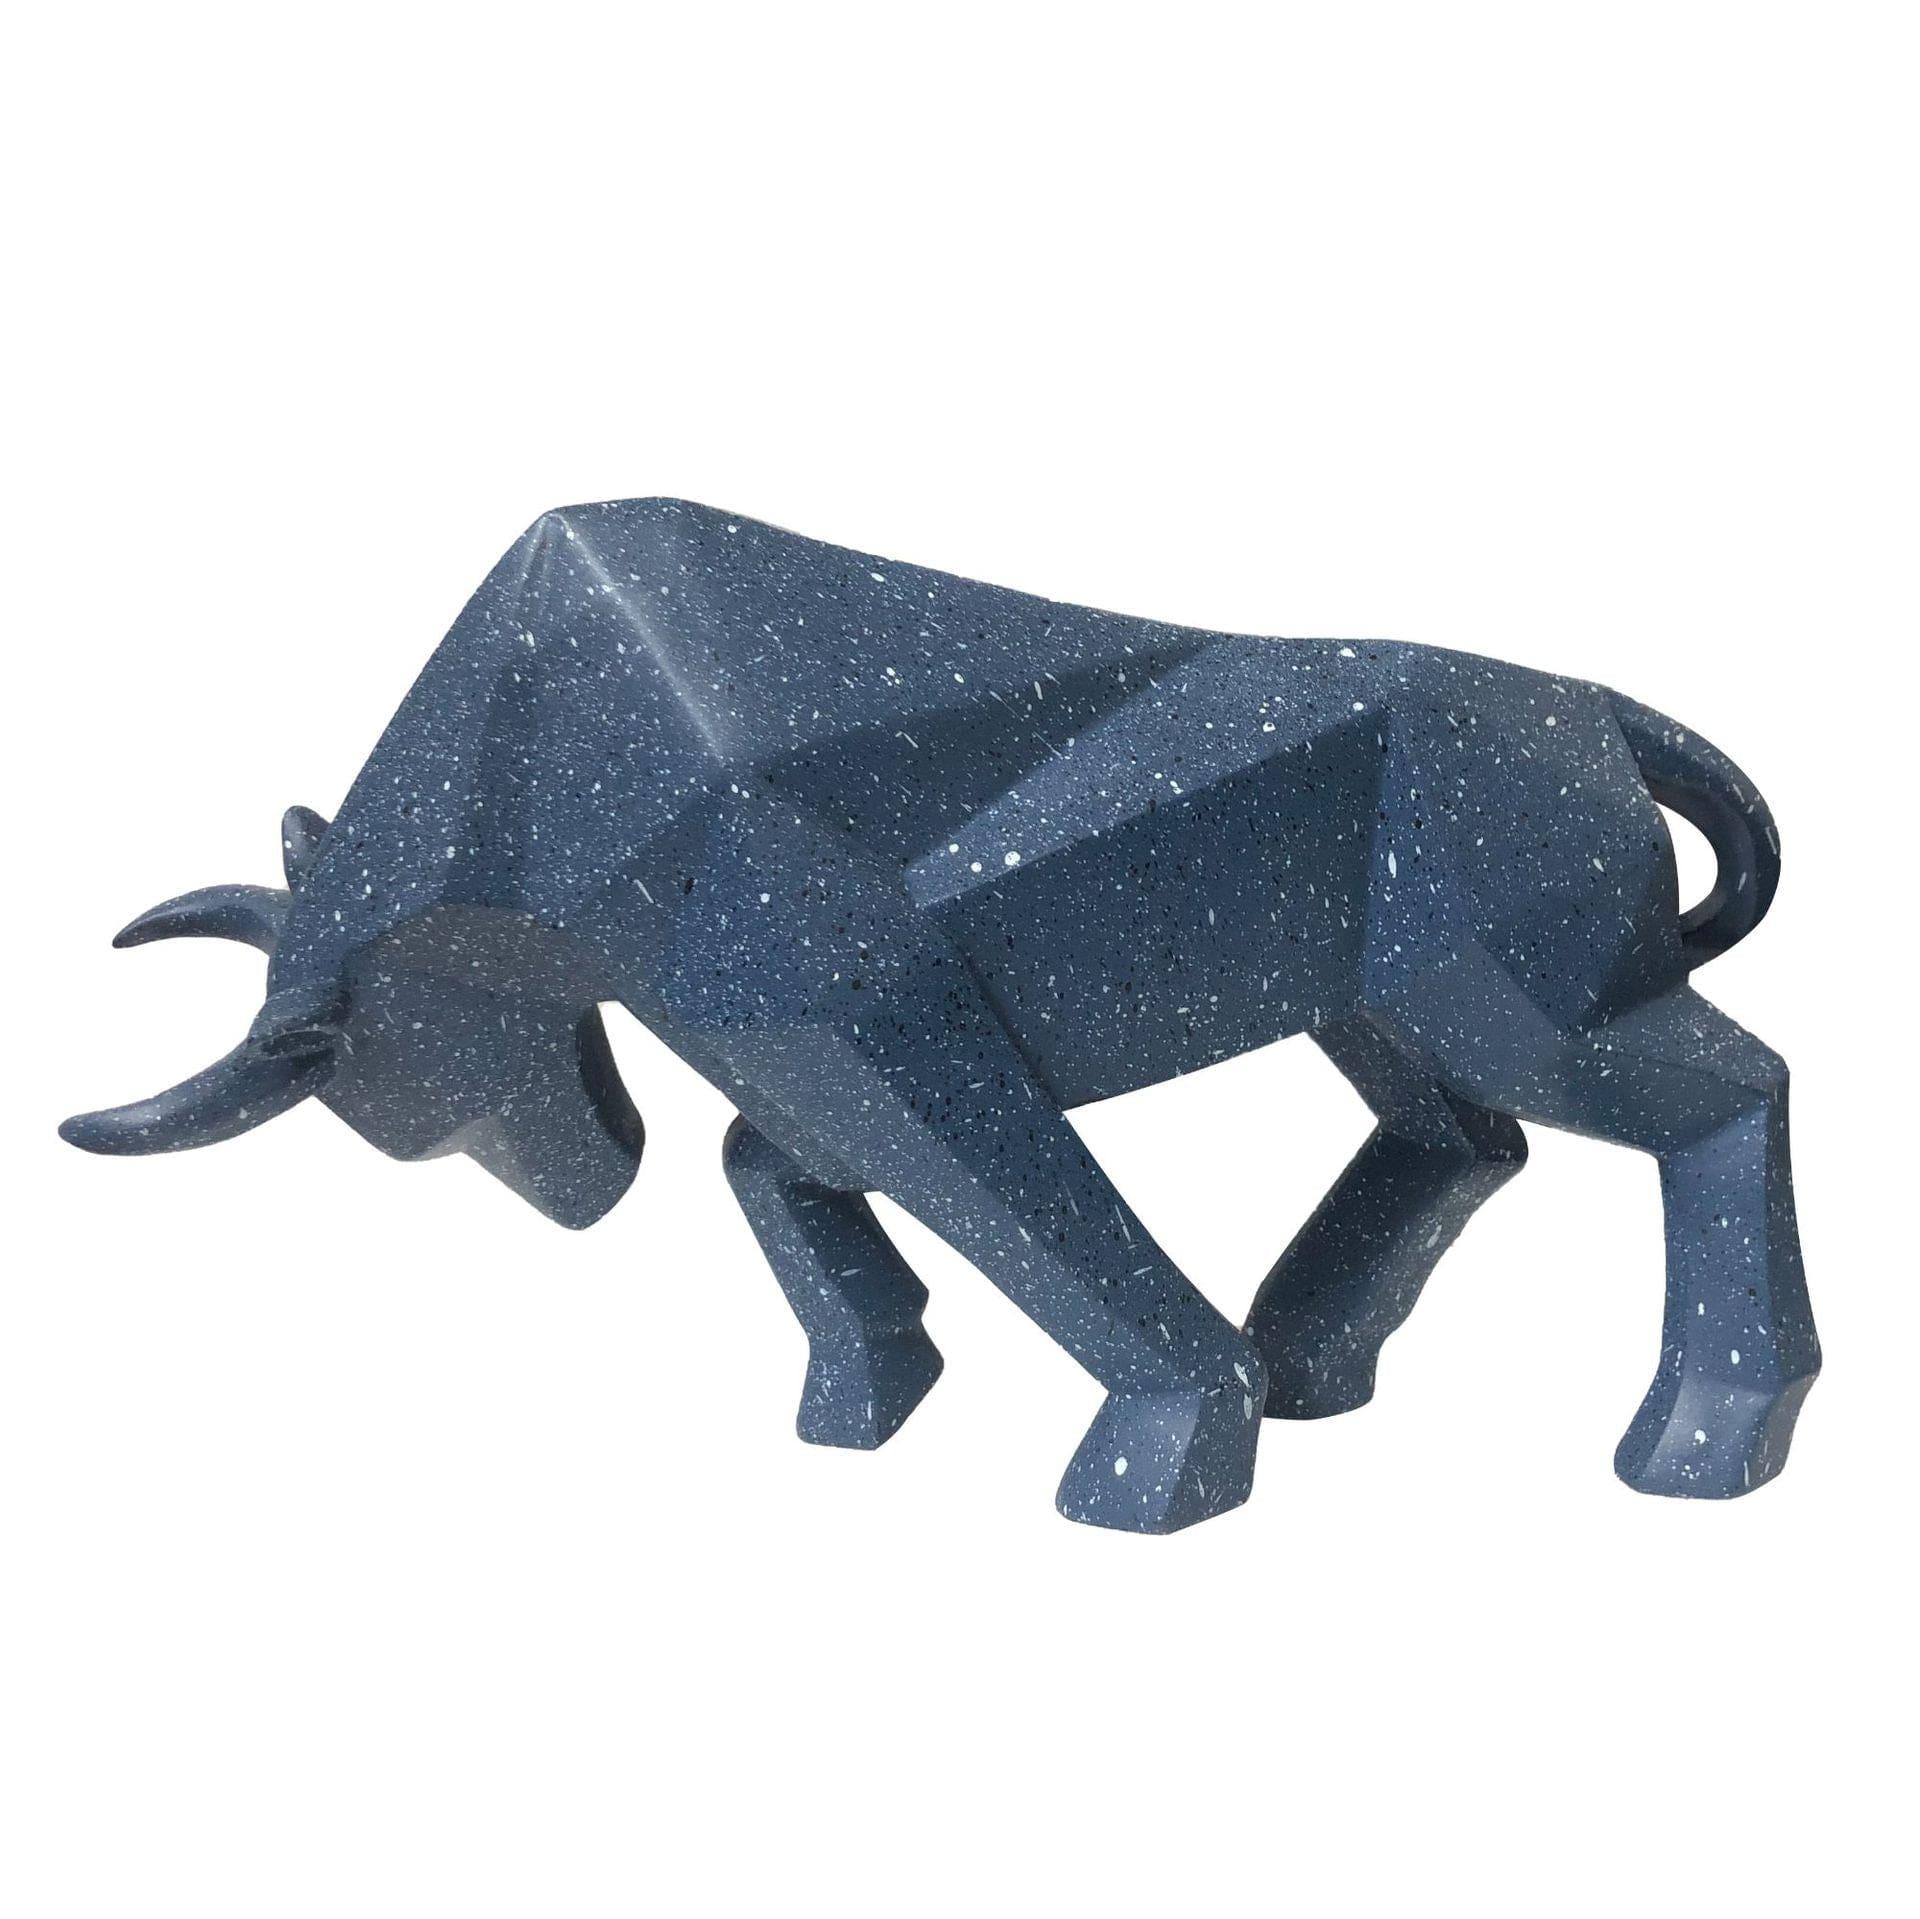 Shop 0 A-blue Bull Statues Art Geometric Resin Bison Sculpture Animal Home Decoration Tabletop Ox Figurine Ornament Office Crafts Decor Gifts Mademoiselle Home Decor